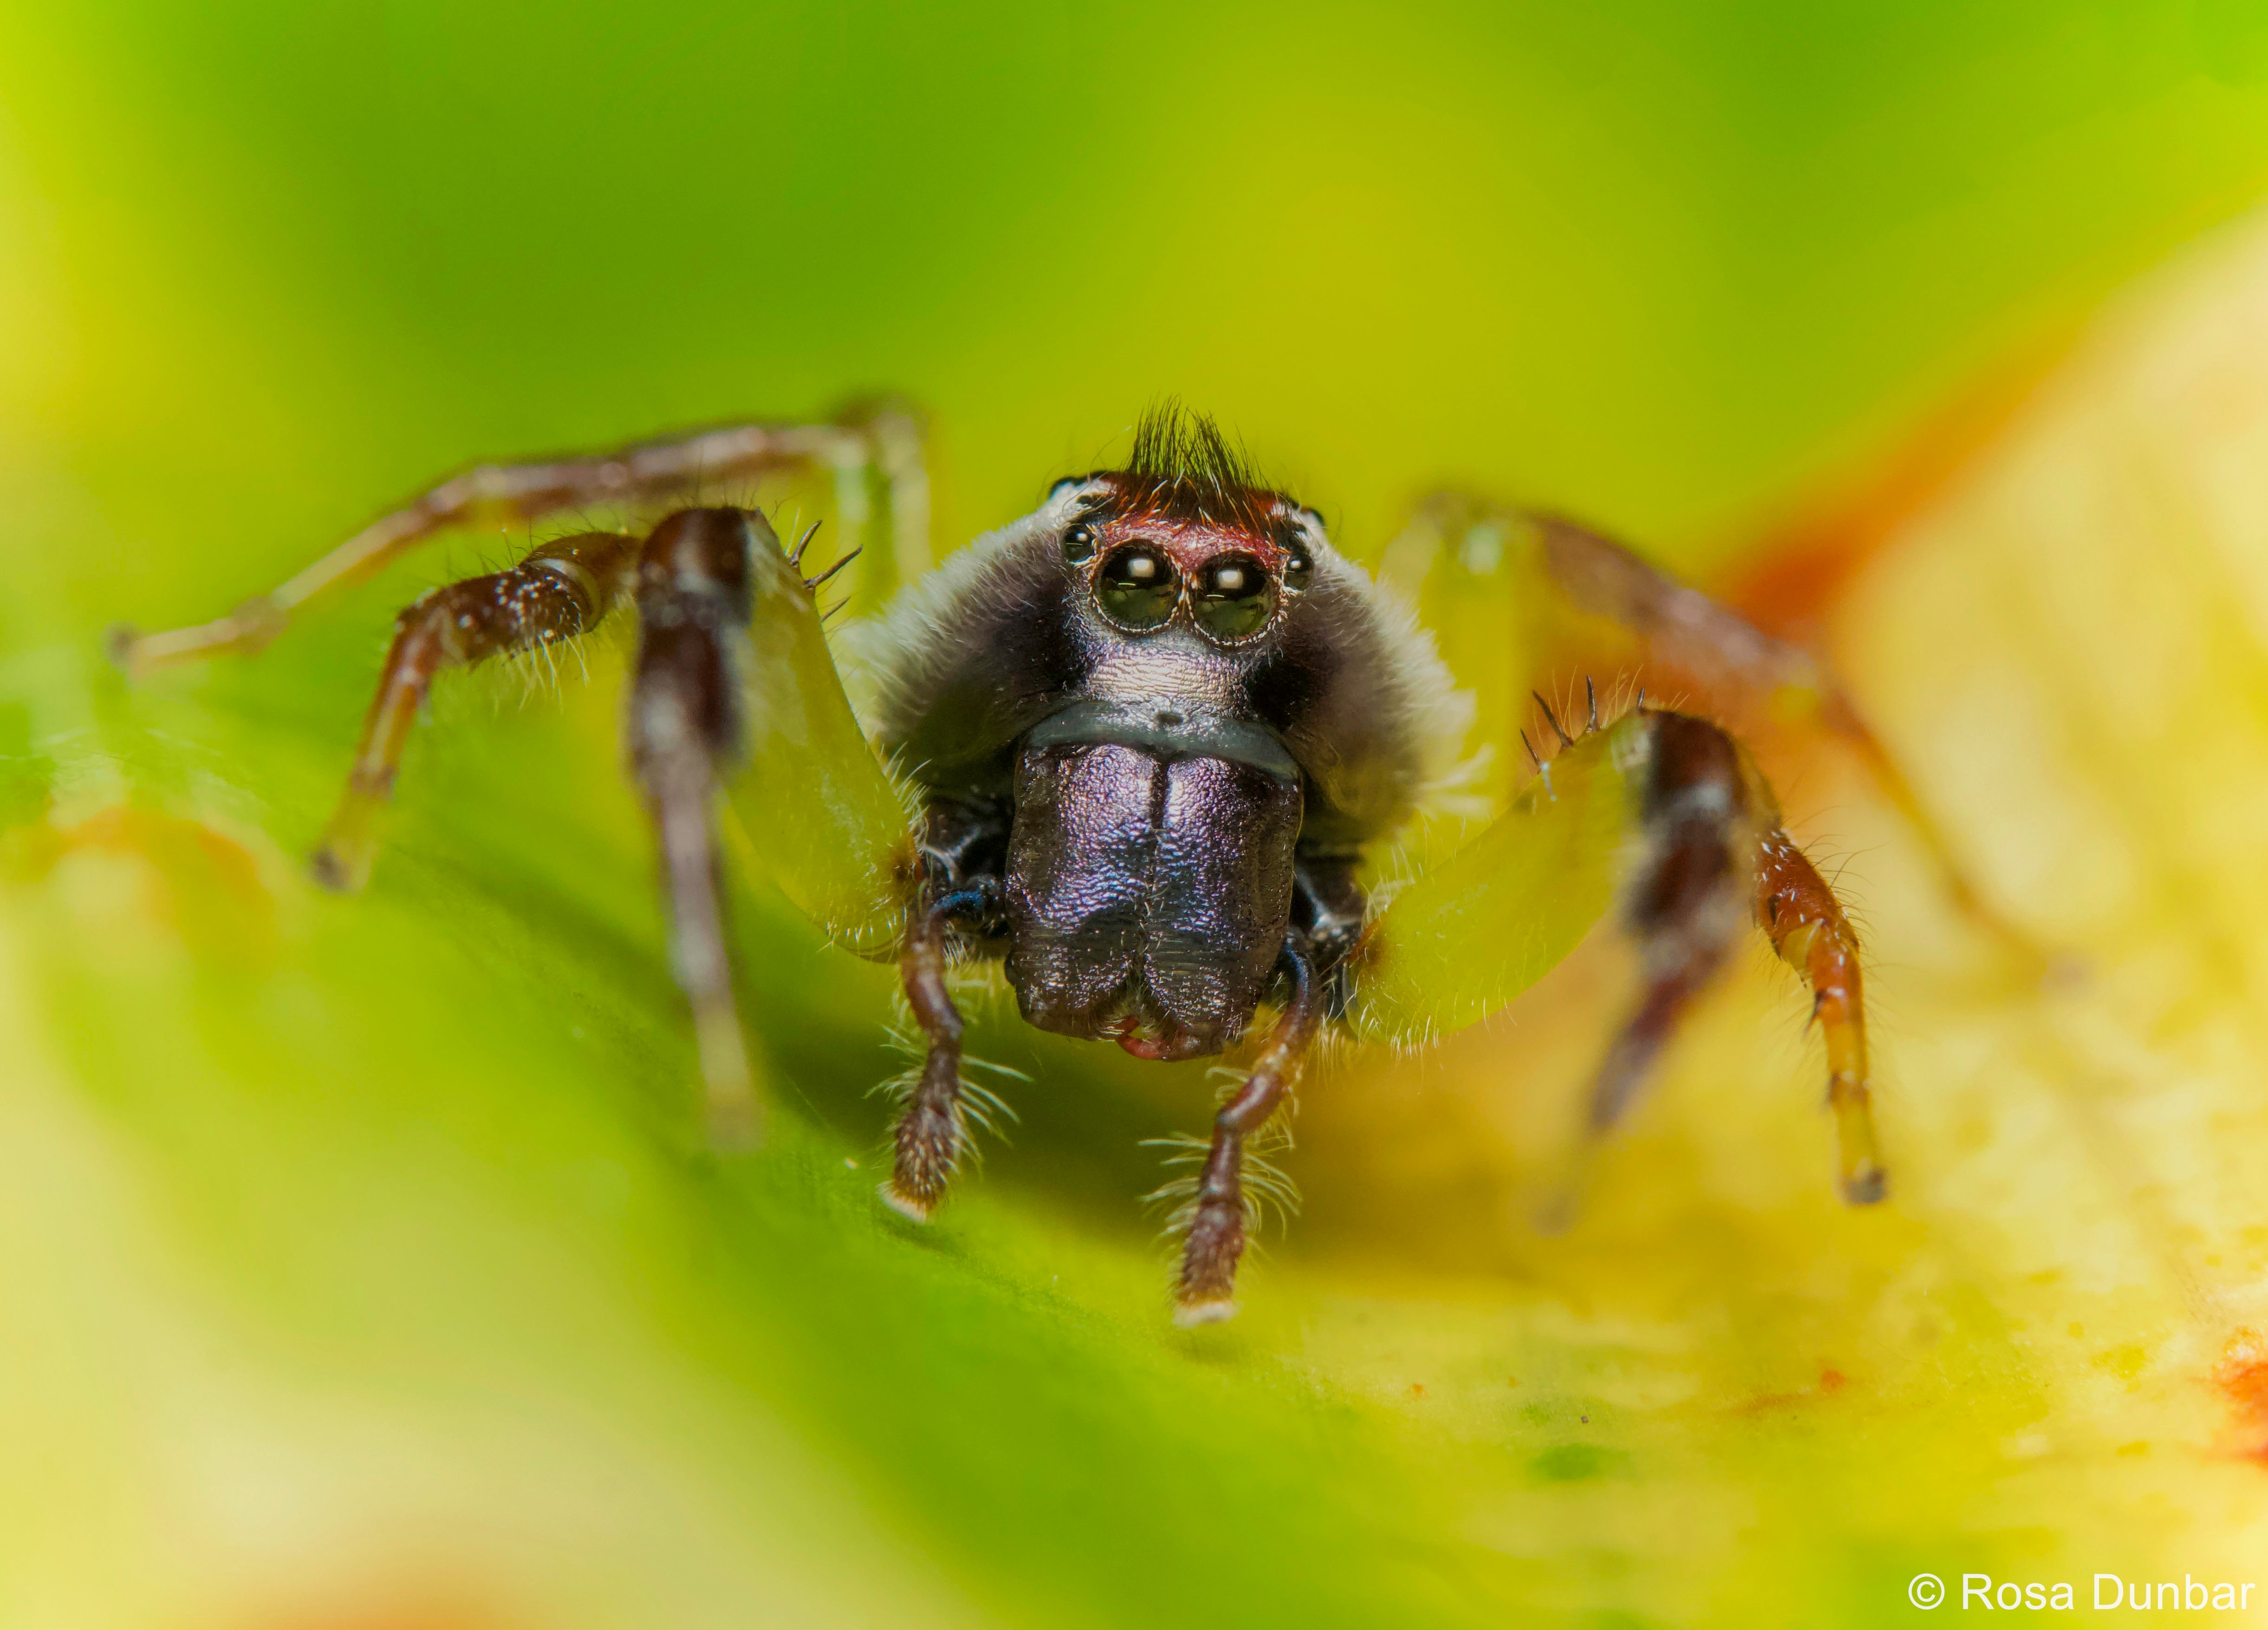 A close up for the face of a spider on a leaf